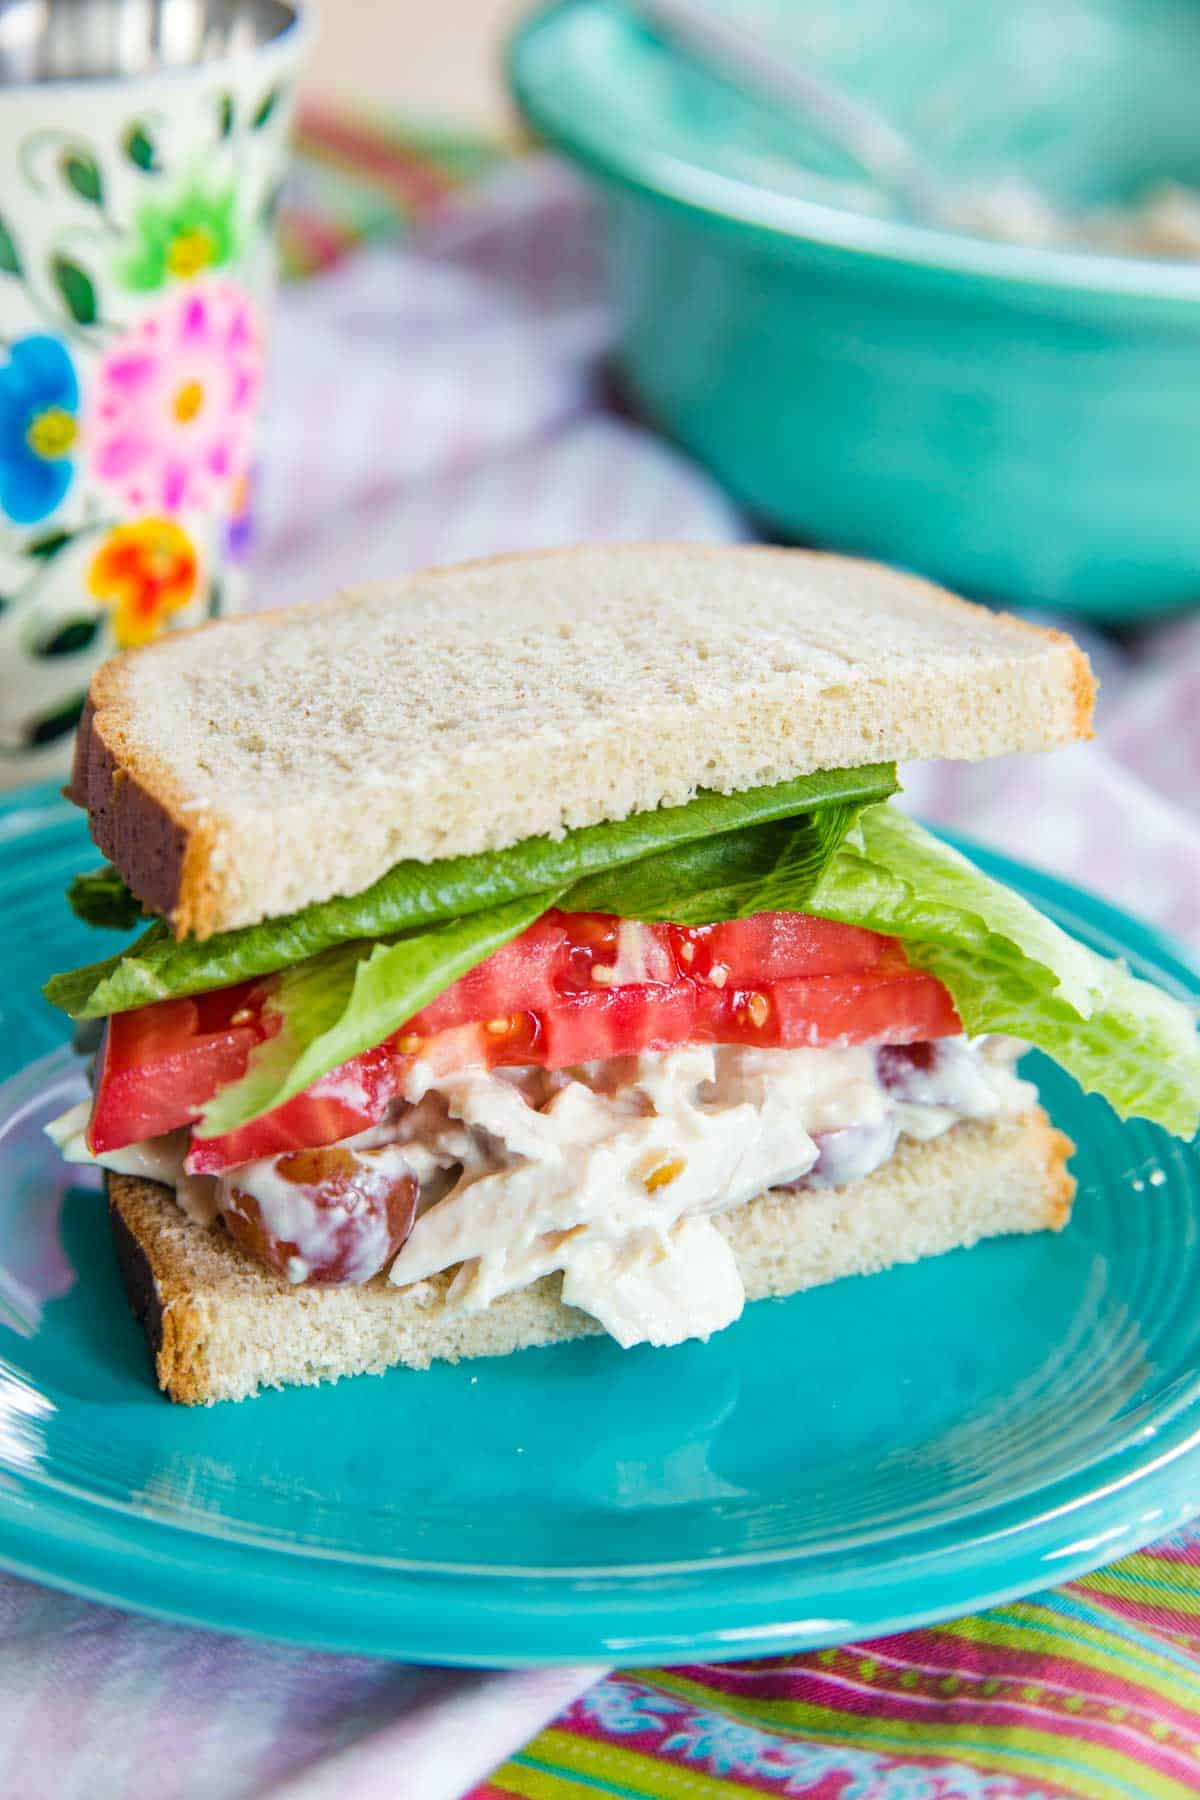 Waldorf chicken salad between two slices of bread with lettuce and tomatoes on a plate.